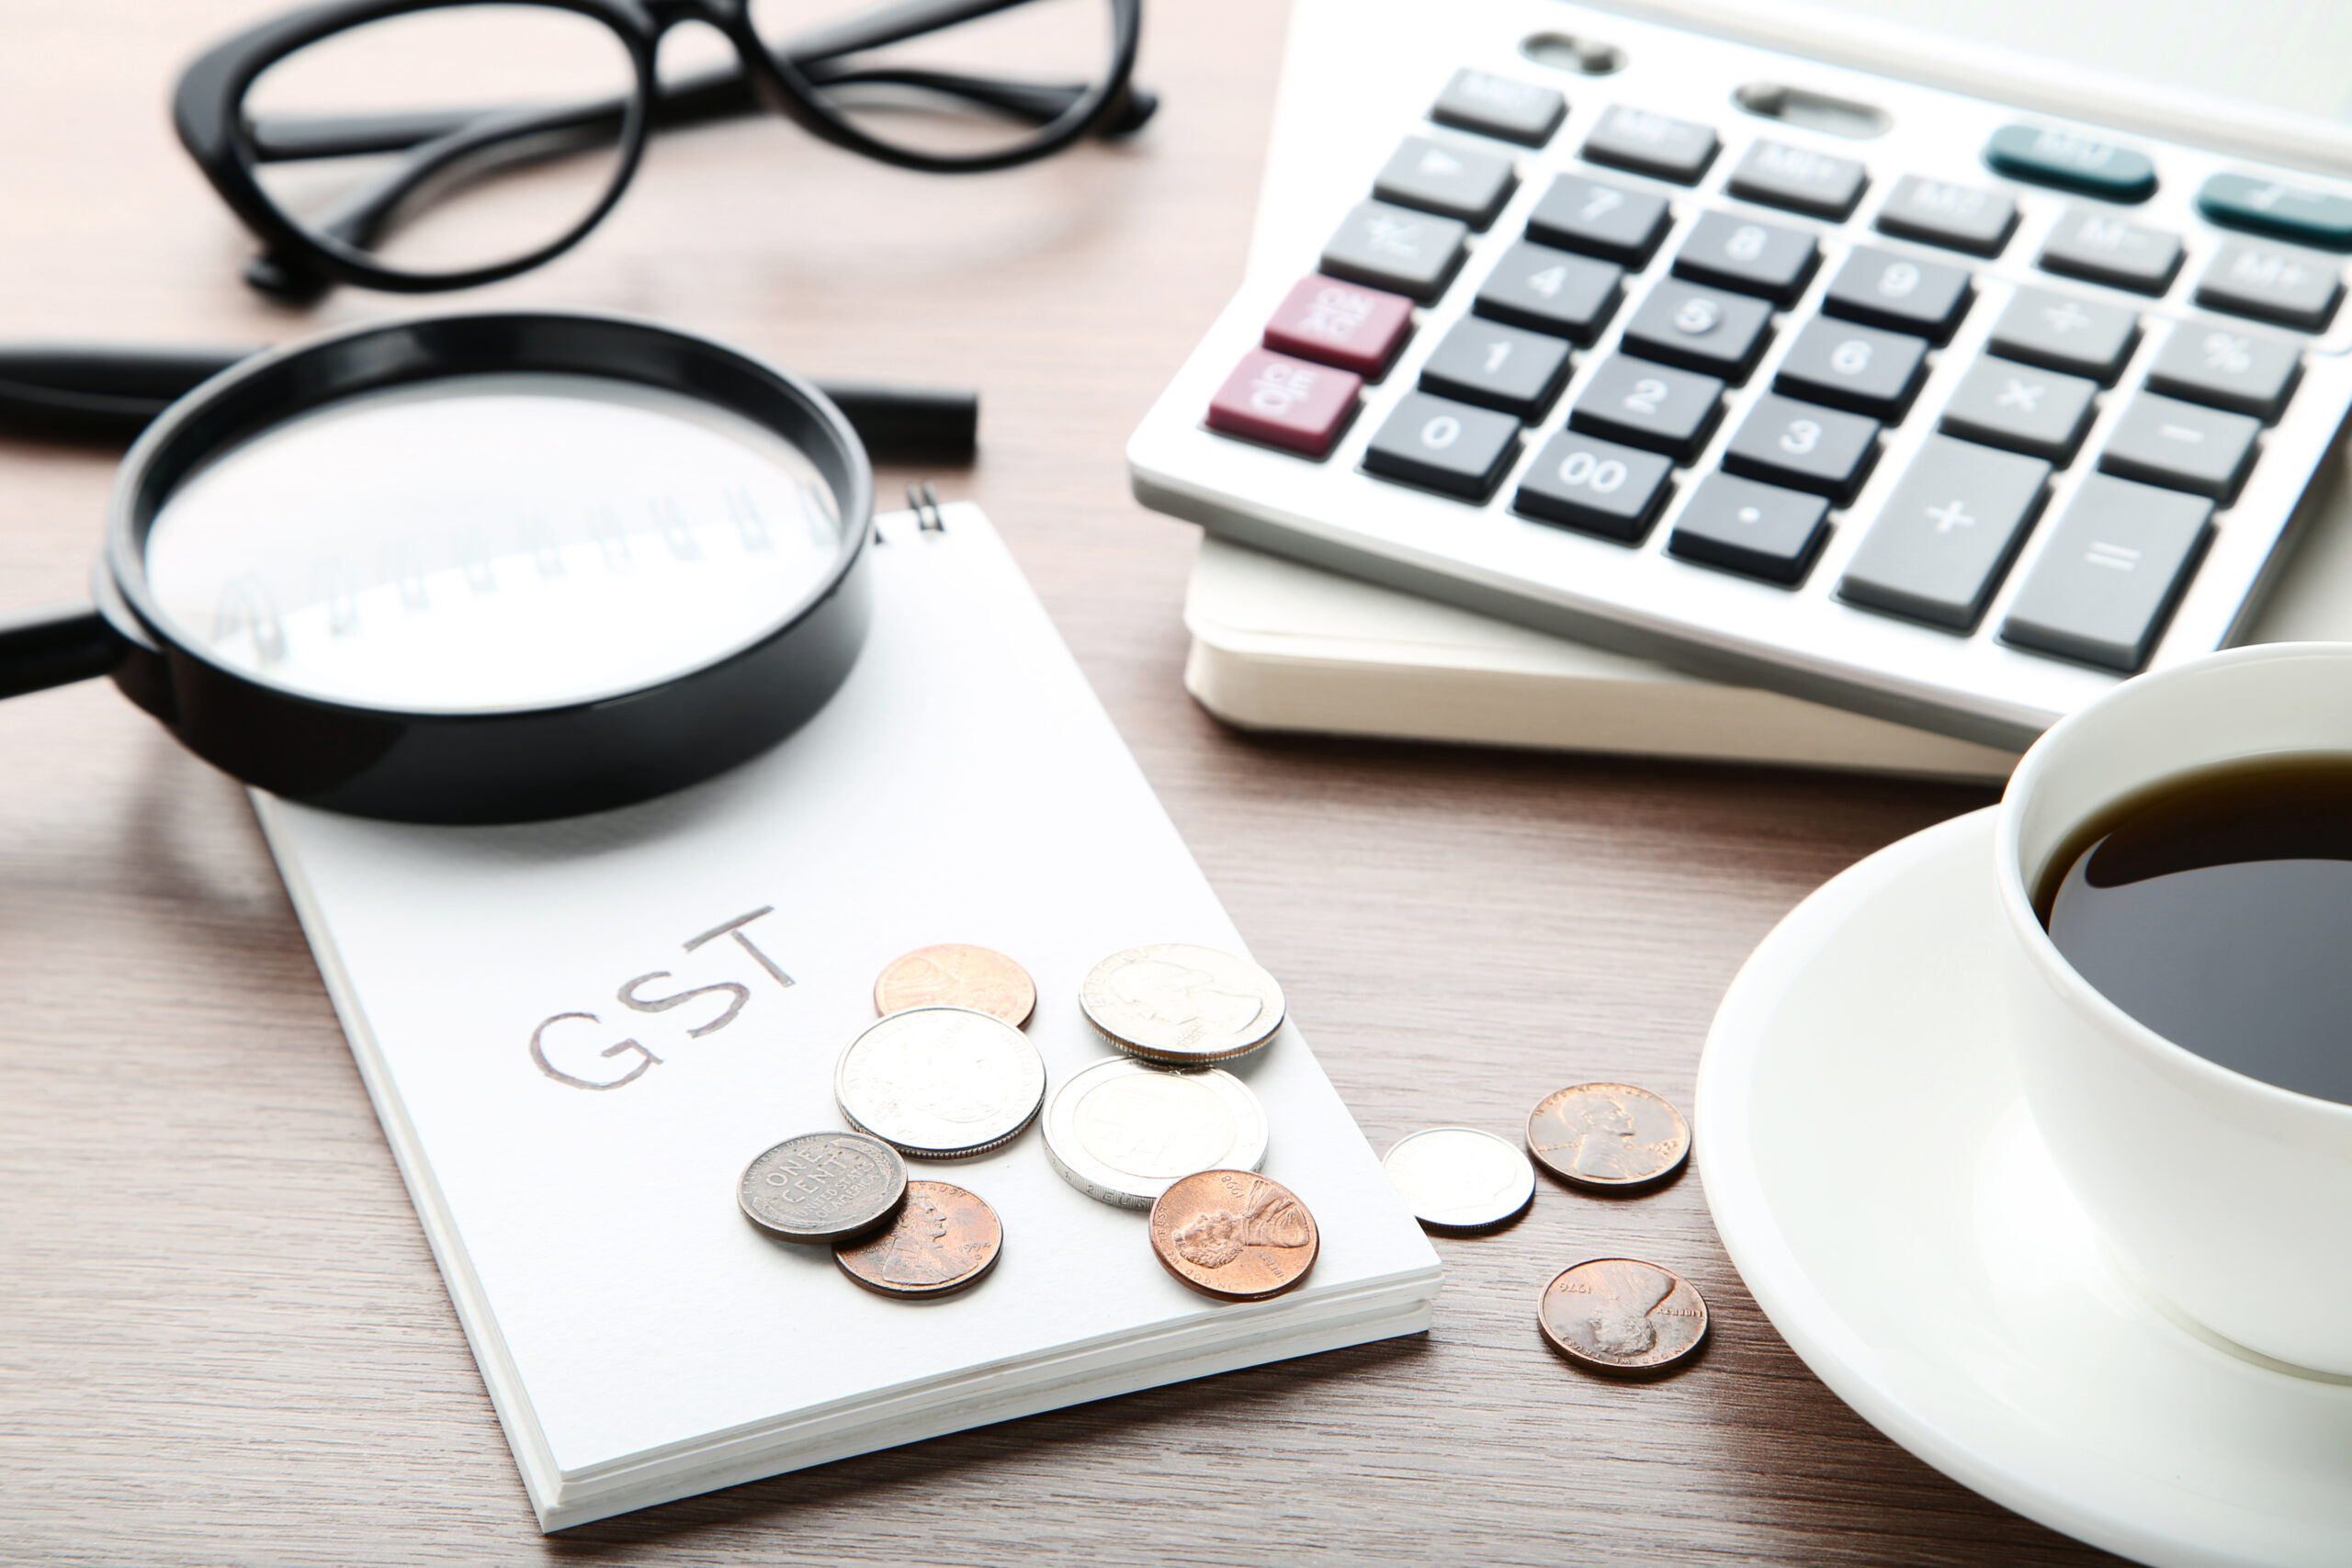 Inscription GST on paper with coins, magnifying glass, calculator and cup of coffee